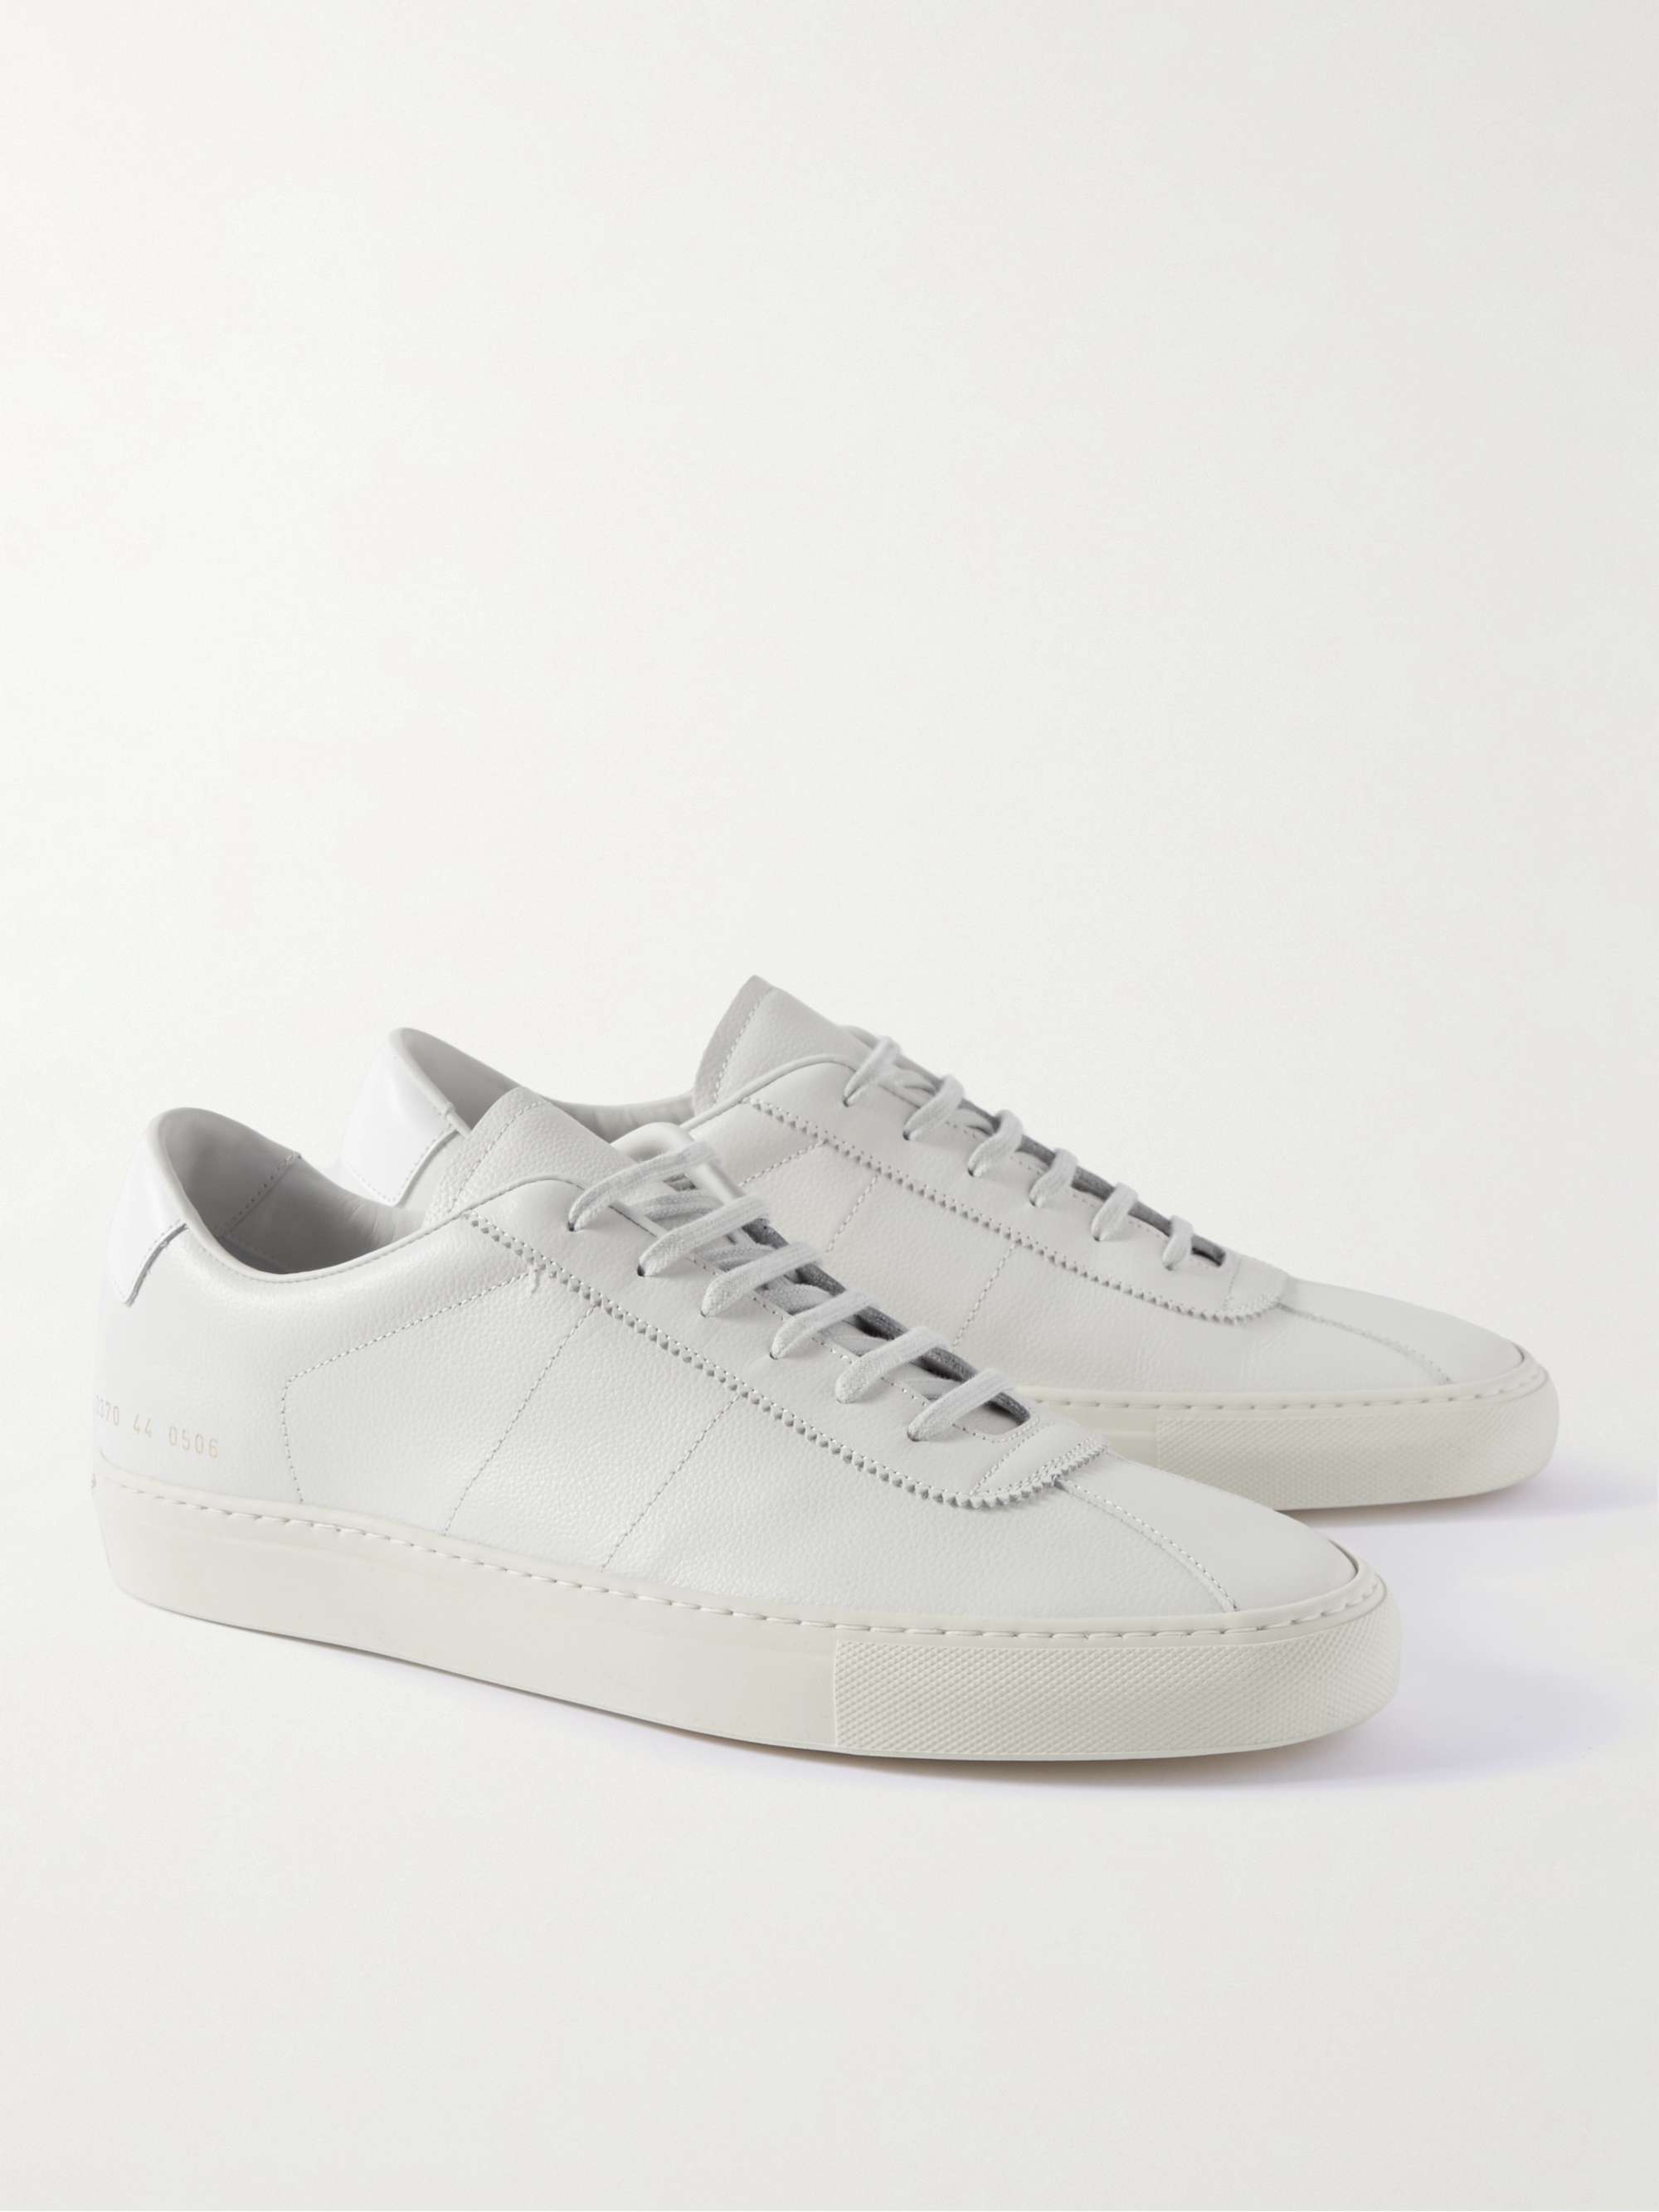 COMMON PROJECTS Tennis 77 Leather Sneakers | MR PORTER